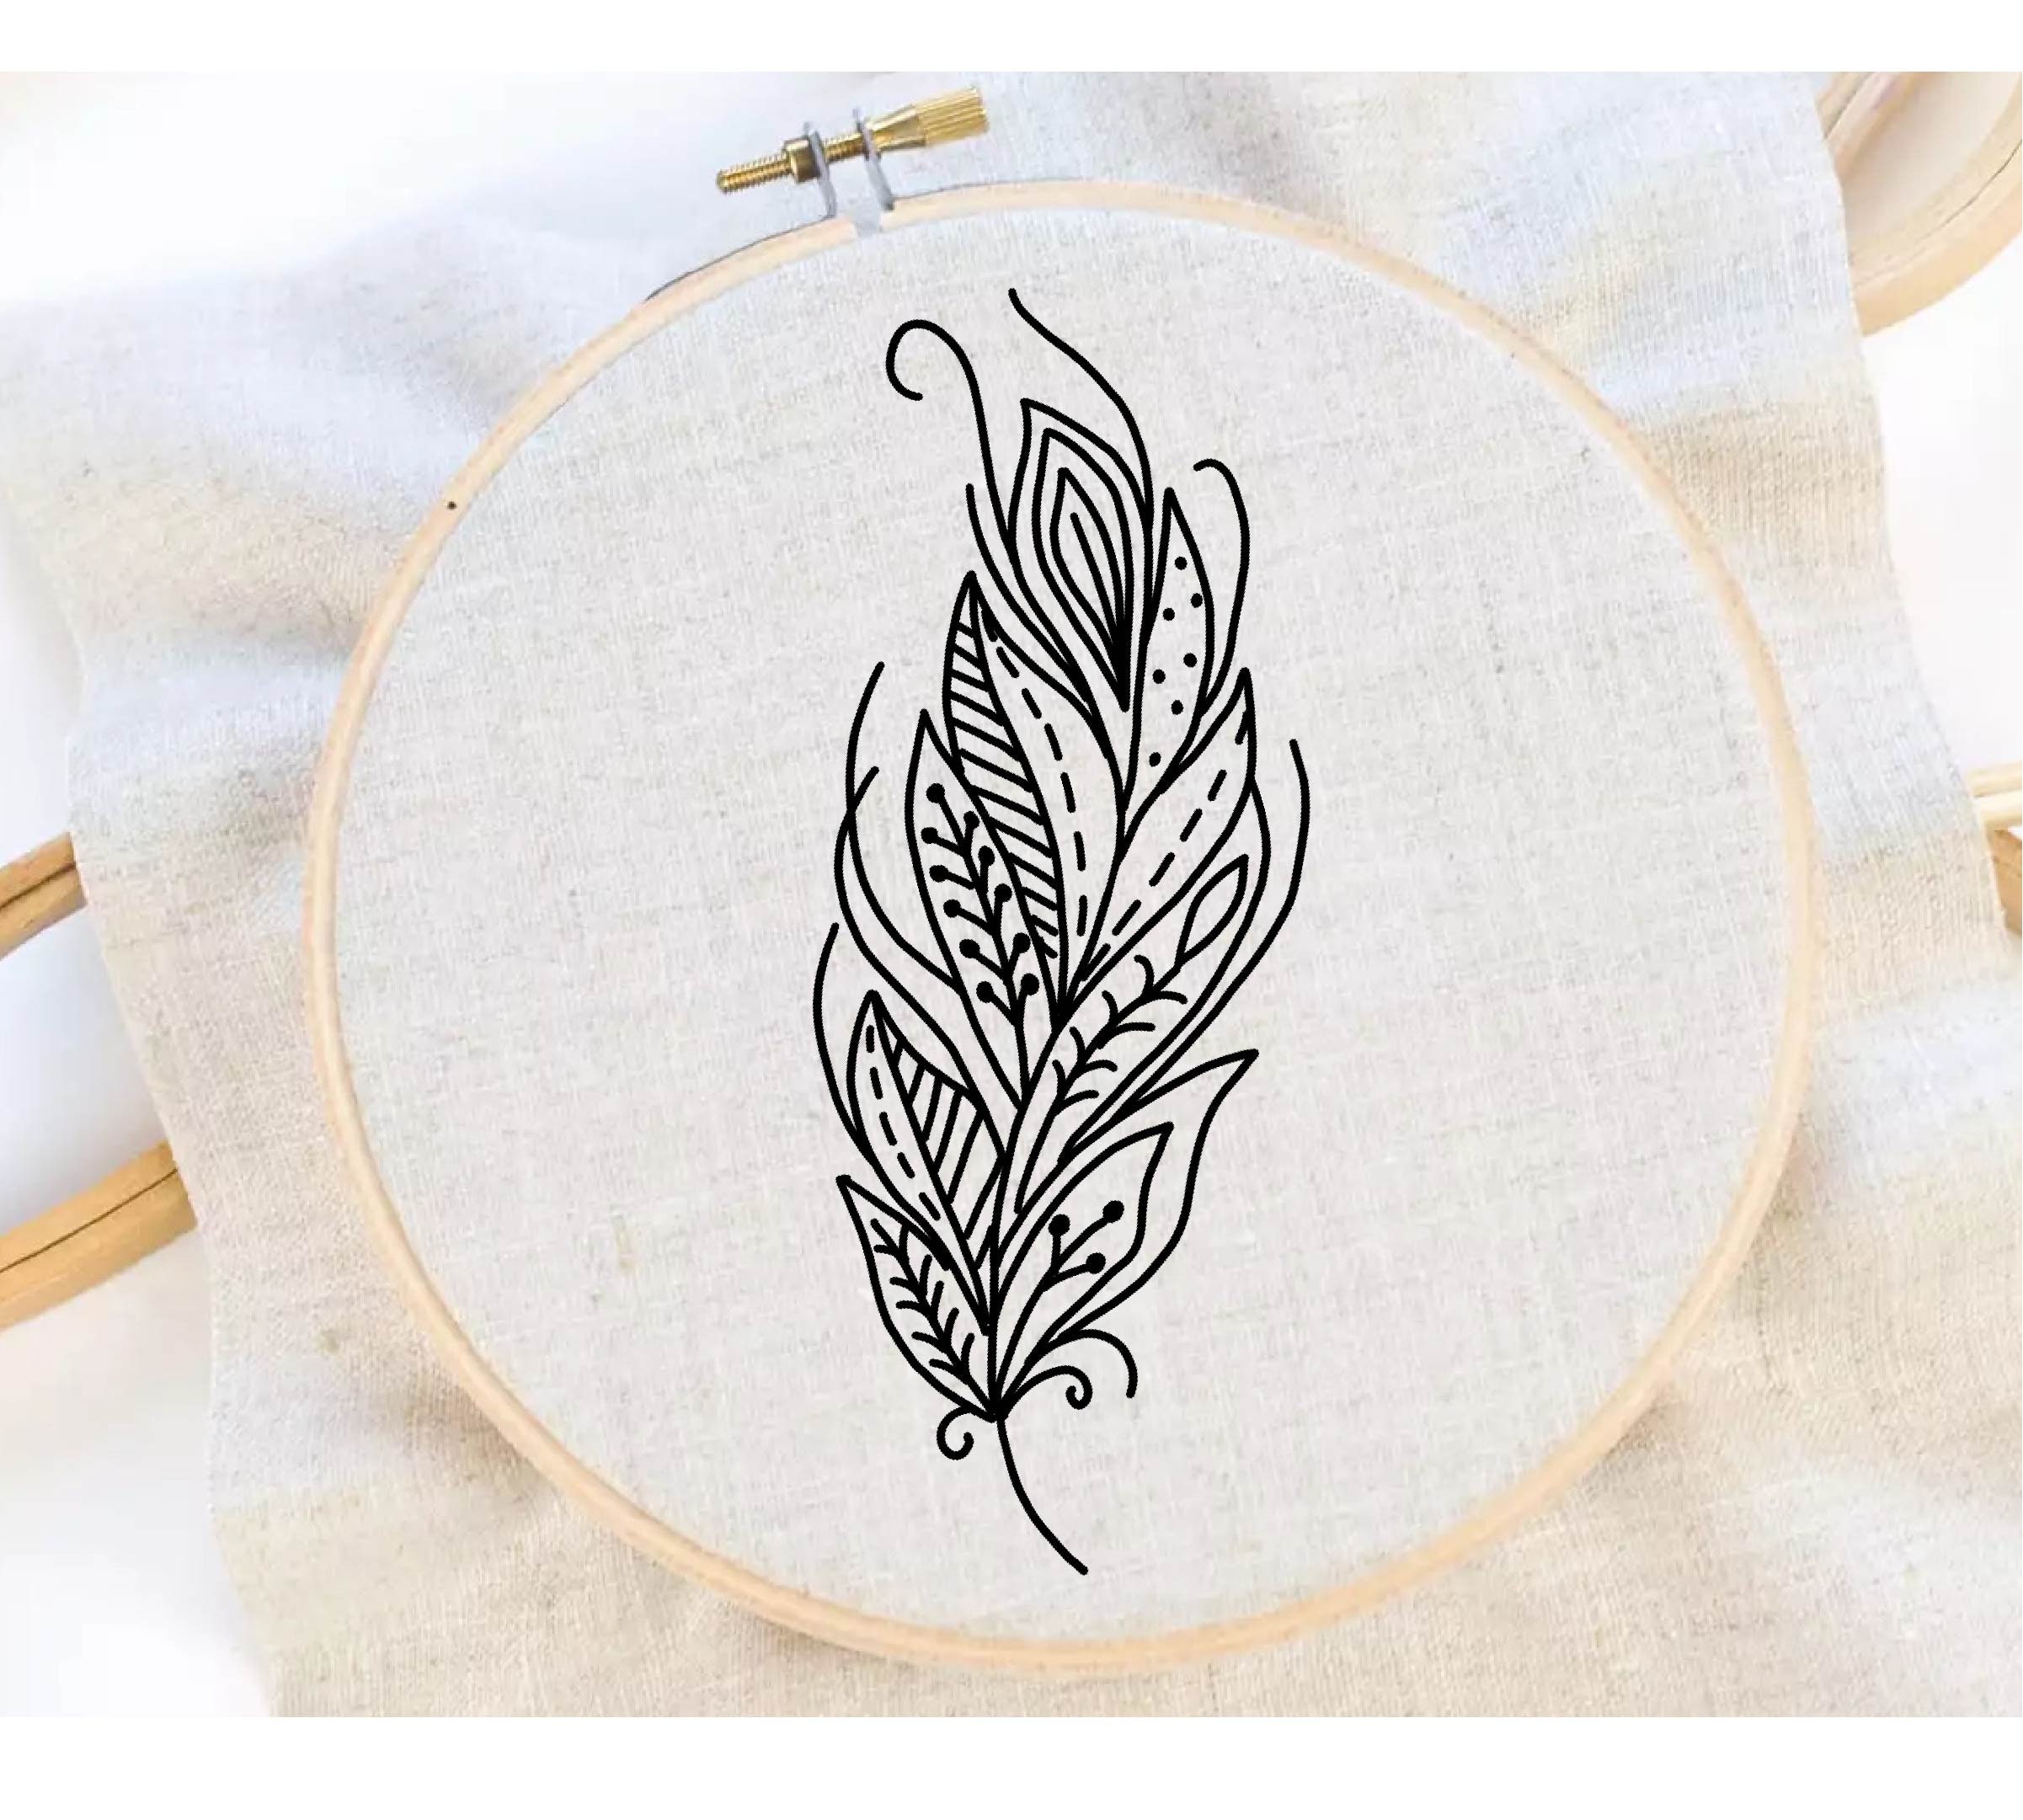 Feathers Embroidery Pattern Feather Art Embroidery Sampler Hand Embroidery  Pattern Boho Embroidery PDF Instant Download 